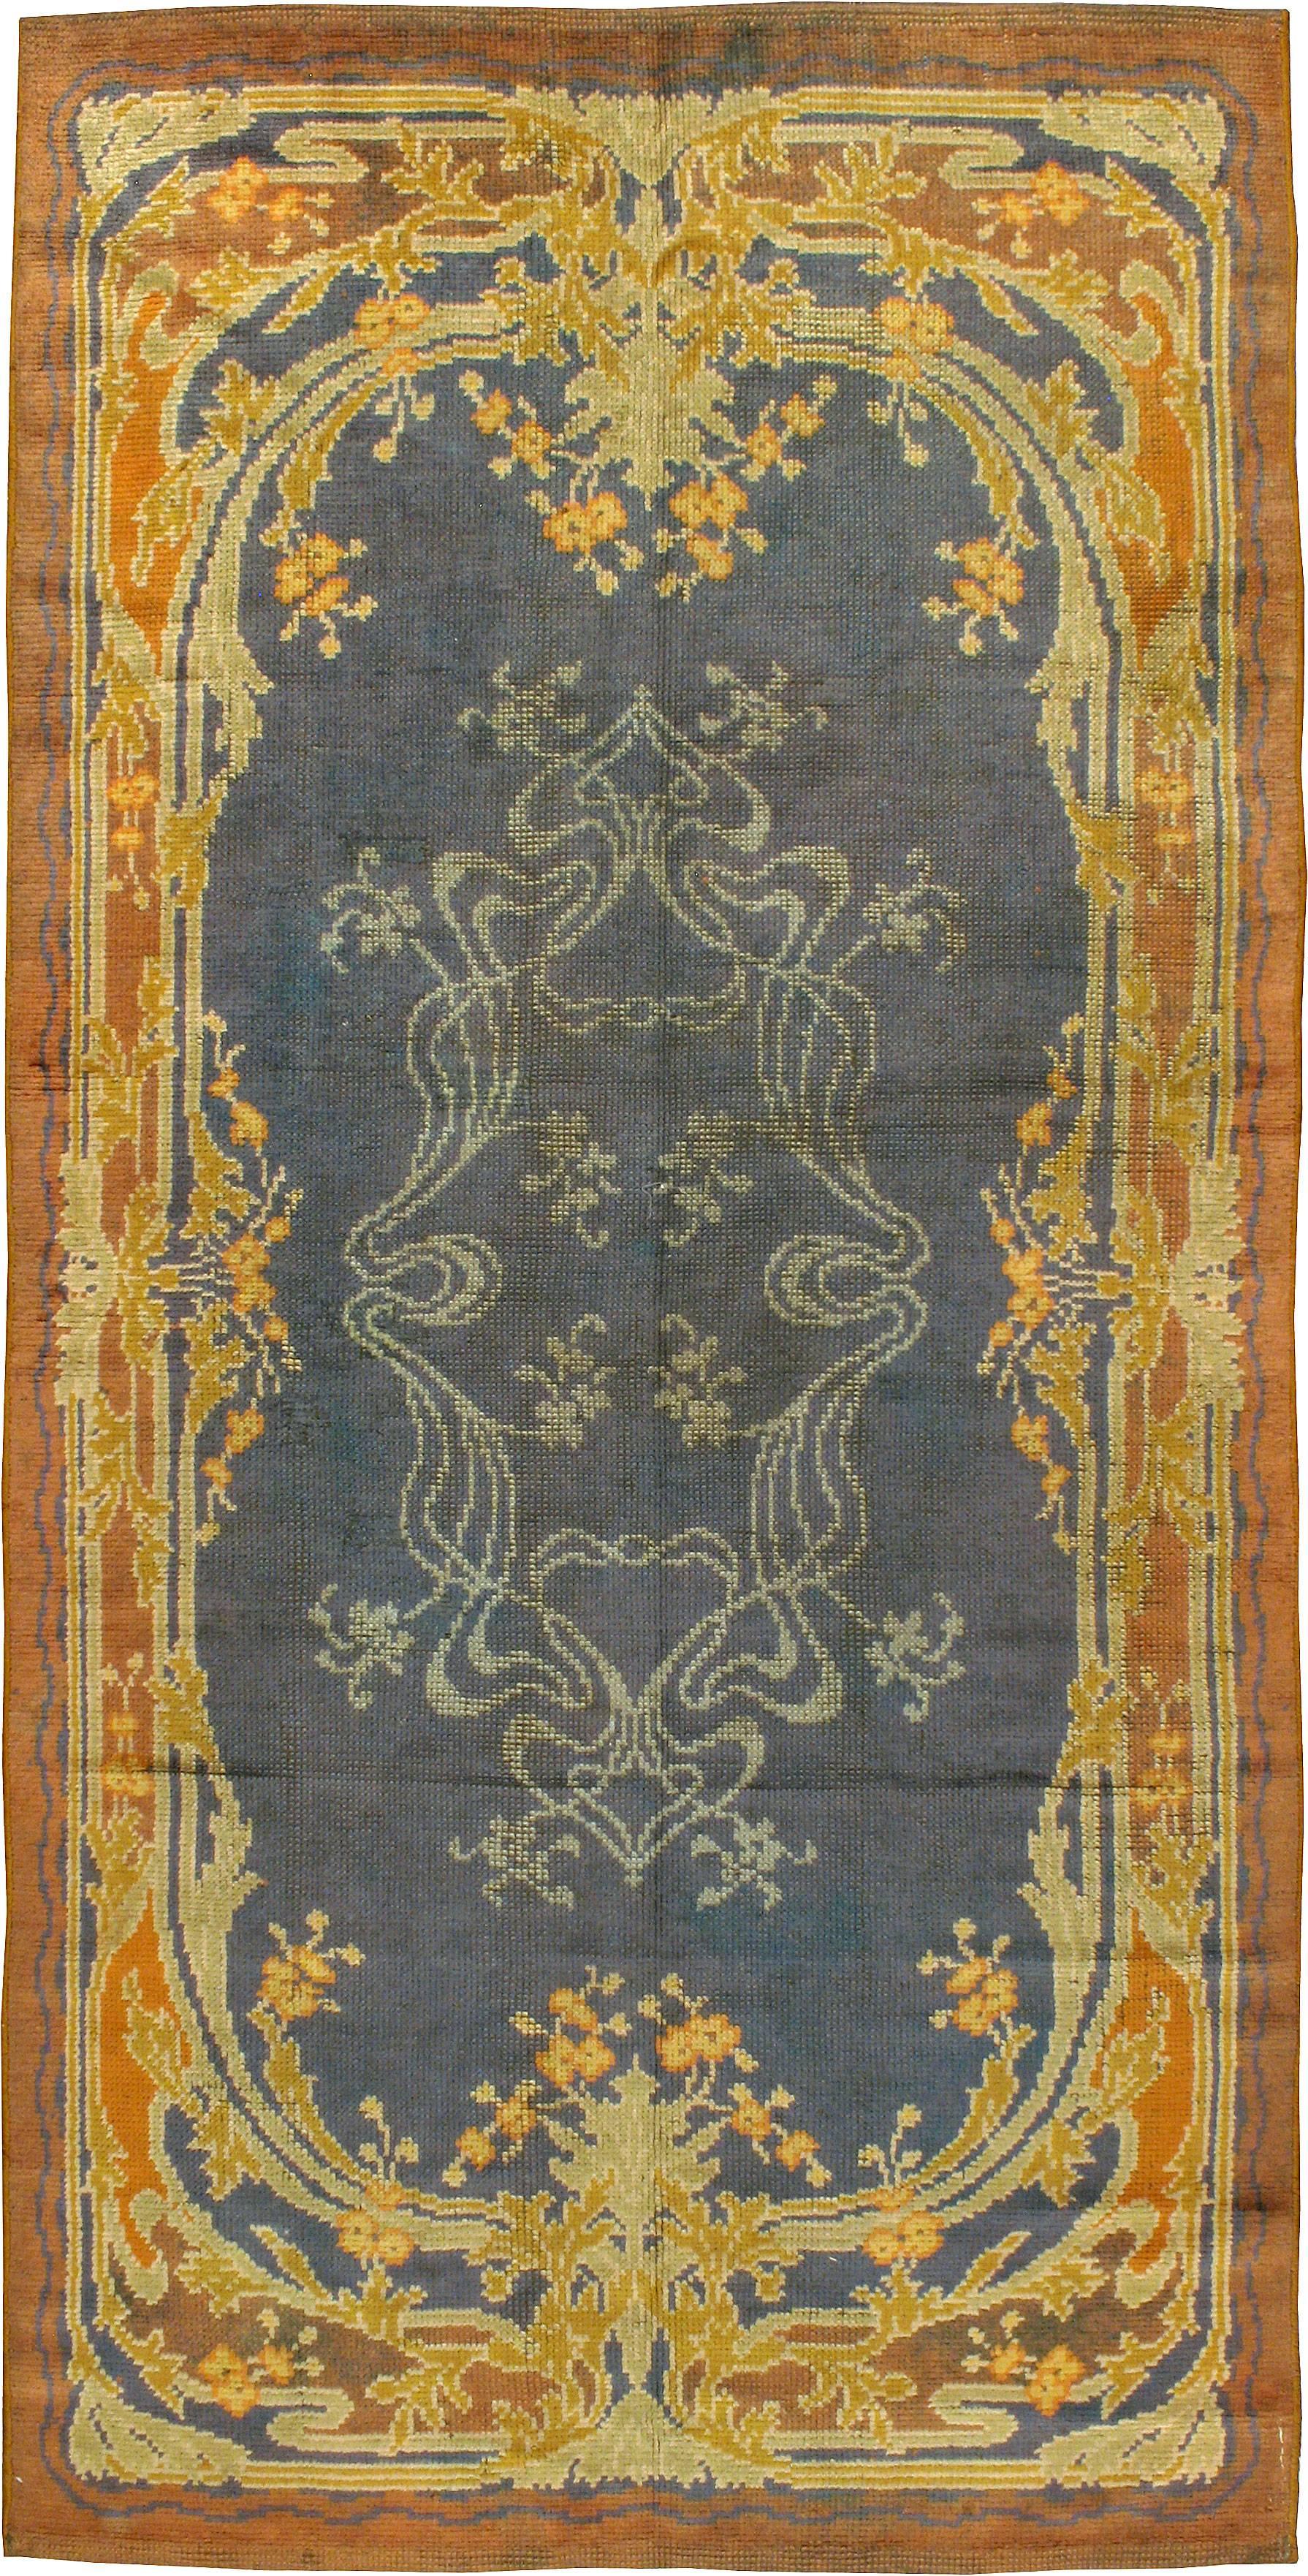 An antique European Donegal carpet from the second quarter of the 20th century.